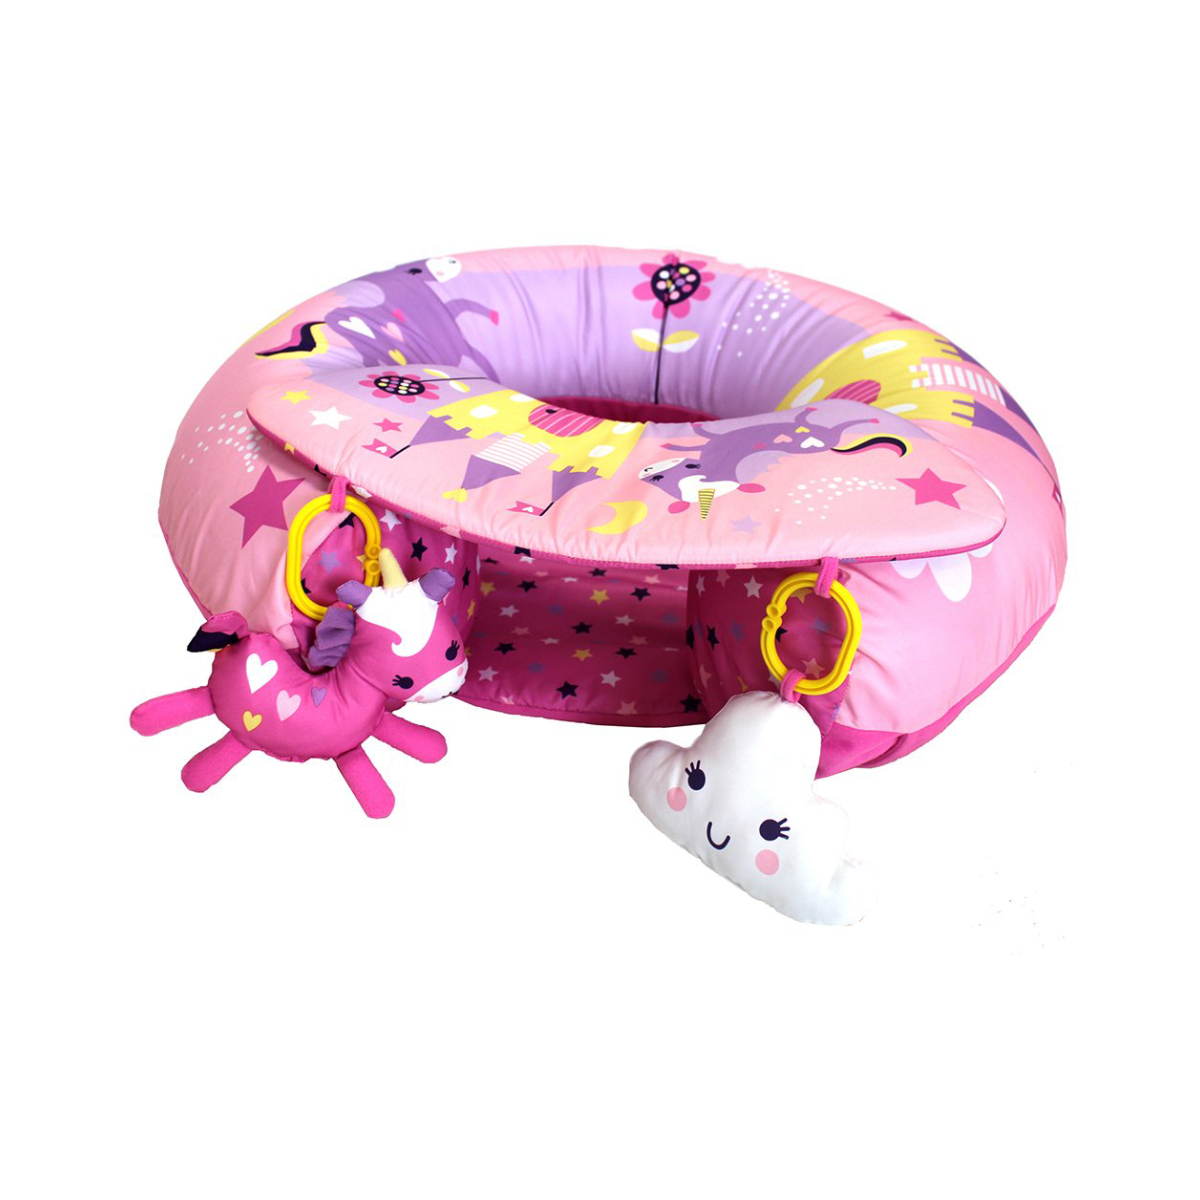 Red Kite Sit Me up Unicorn Inflatable Ring Baby Play Chair (CL)